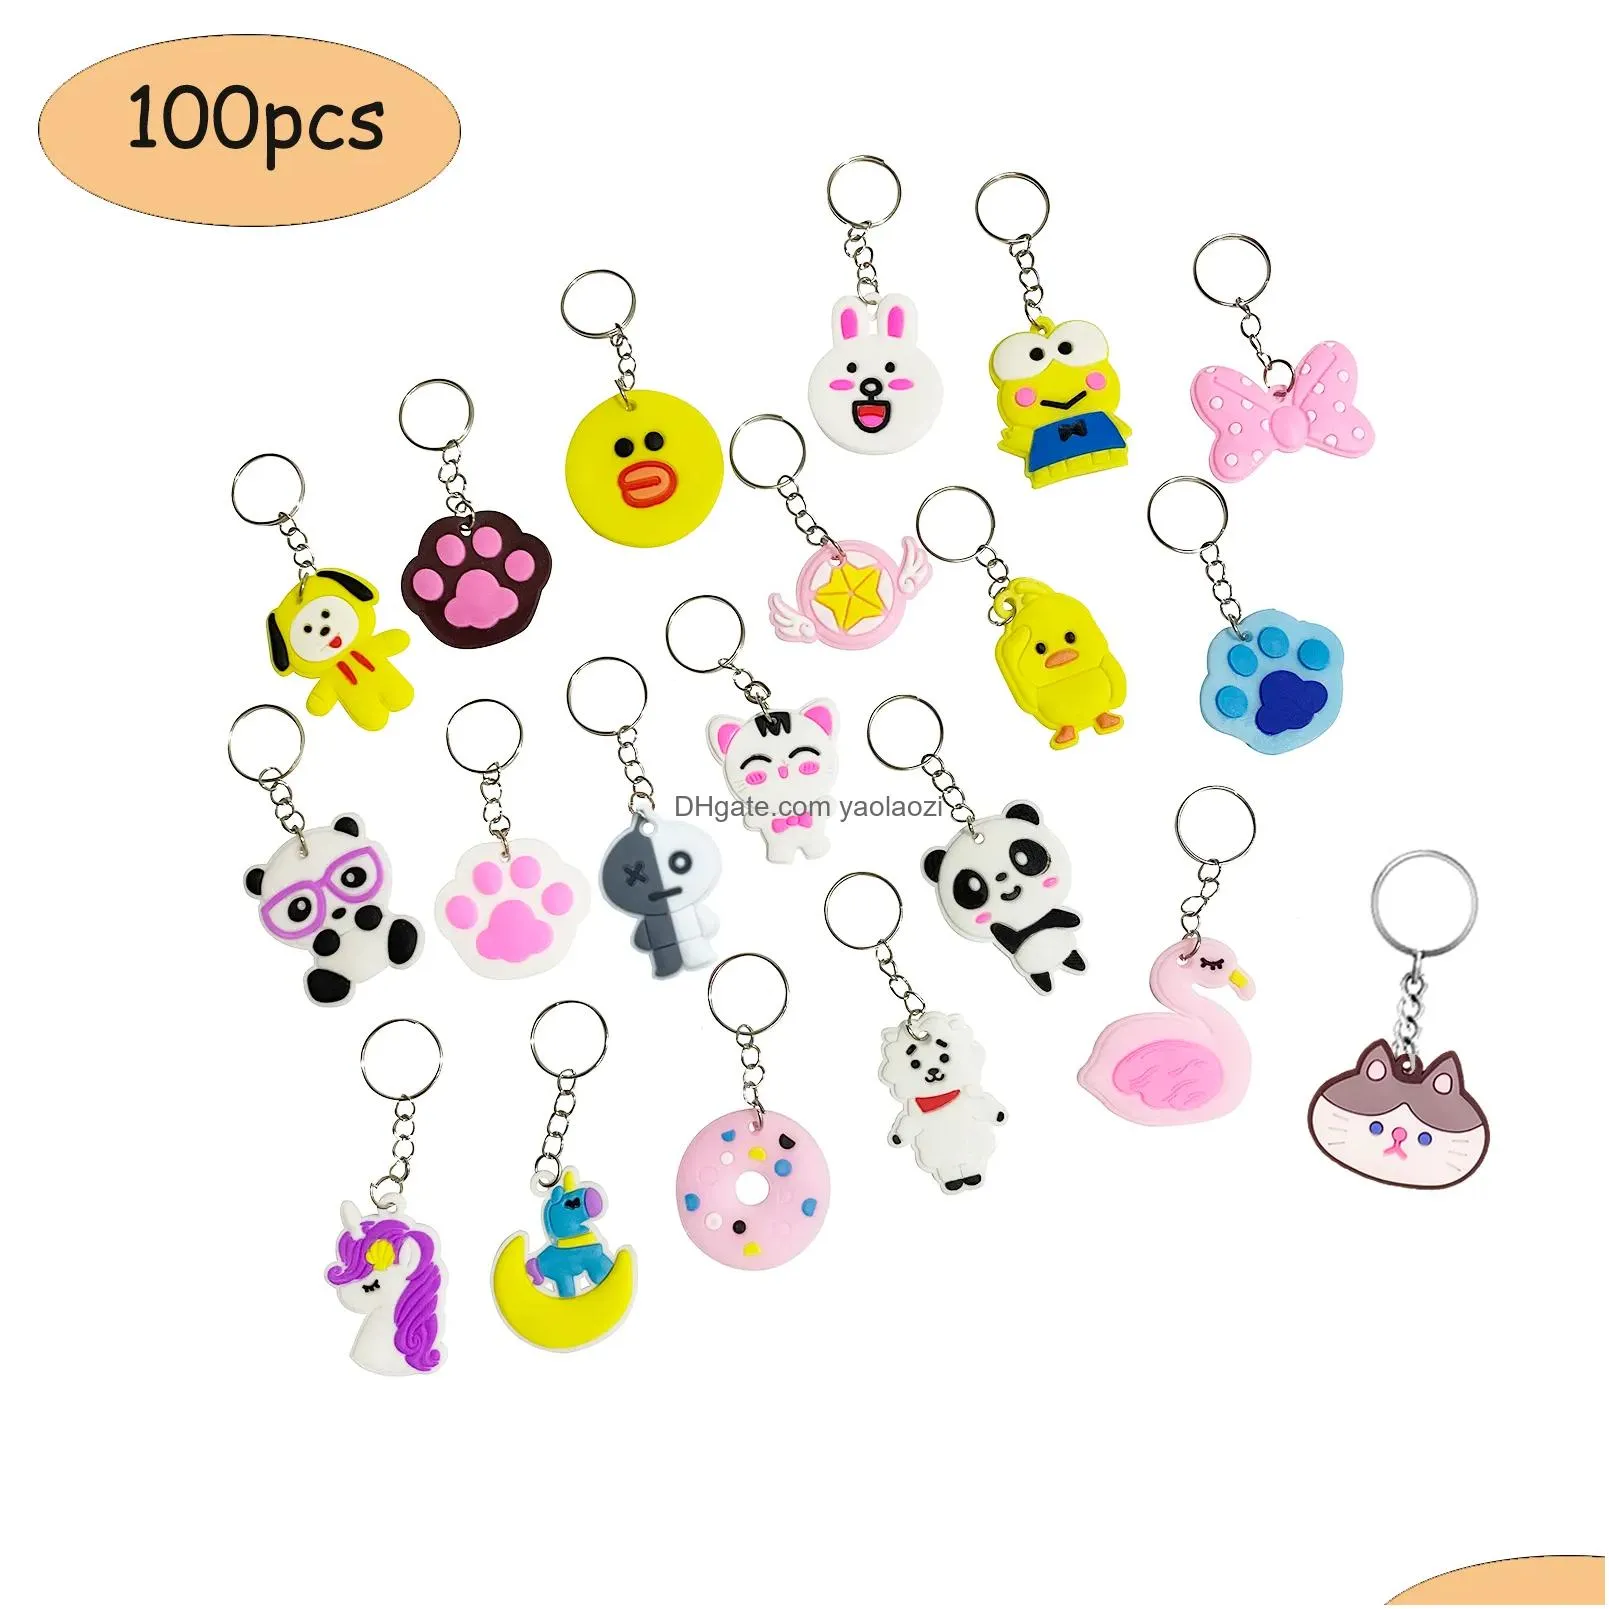 100 pcs cartoon anime keychain party favor cute keyrings whole pvc colorful pendants gift key ring holiday charms sets school 3926028